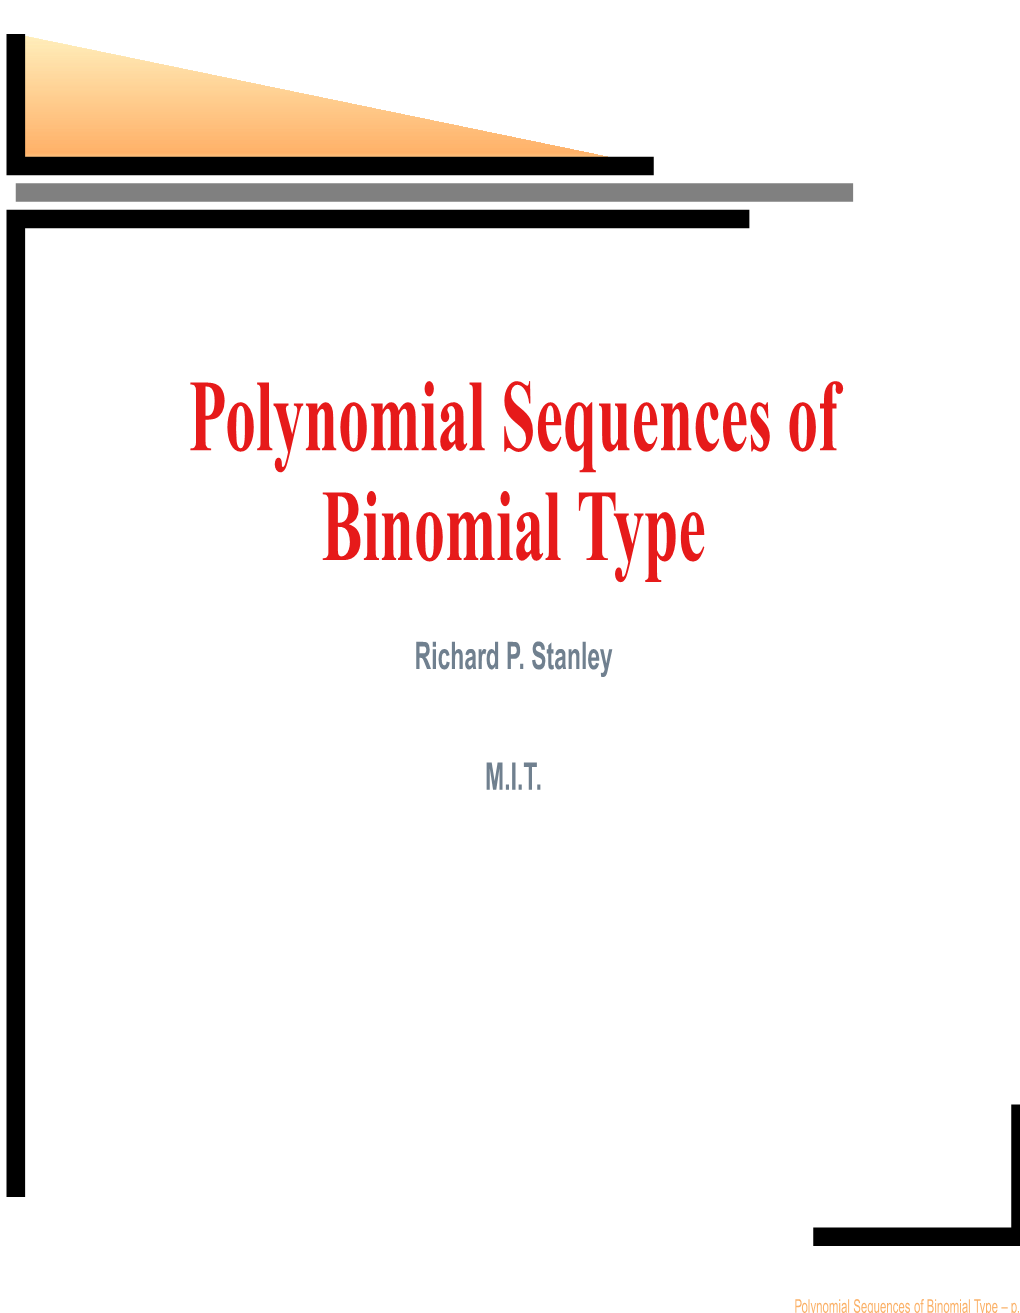 Polynomial Sequences of Binomial Type